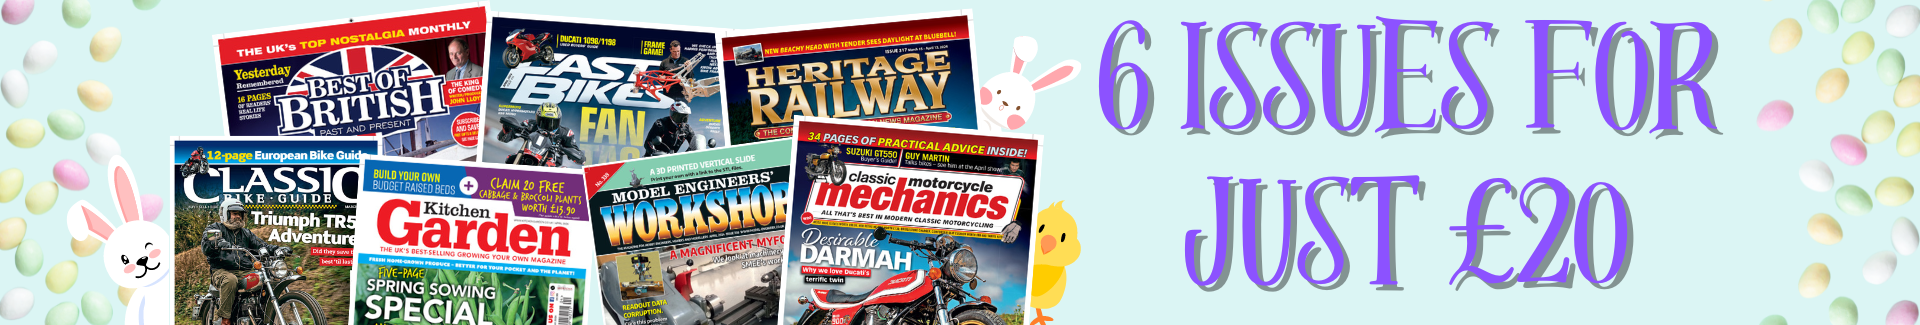 Get cracking deals when you subscribe! For the next 6 months, you can get your favoruite read delivered through your door every month so you won't miss a single issue